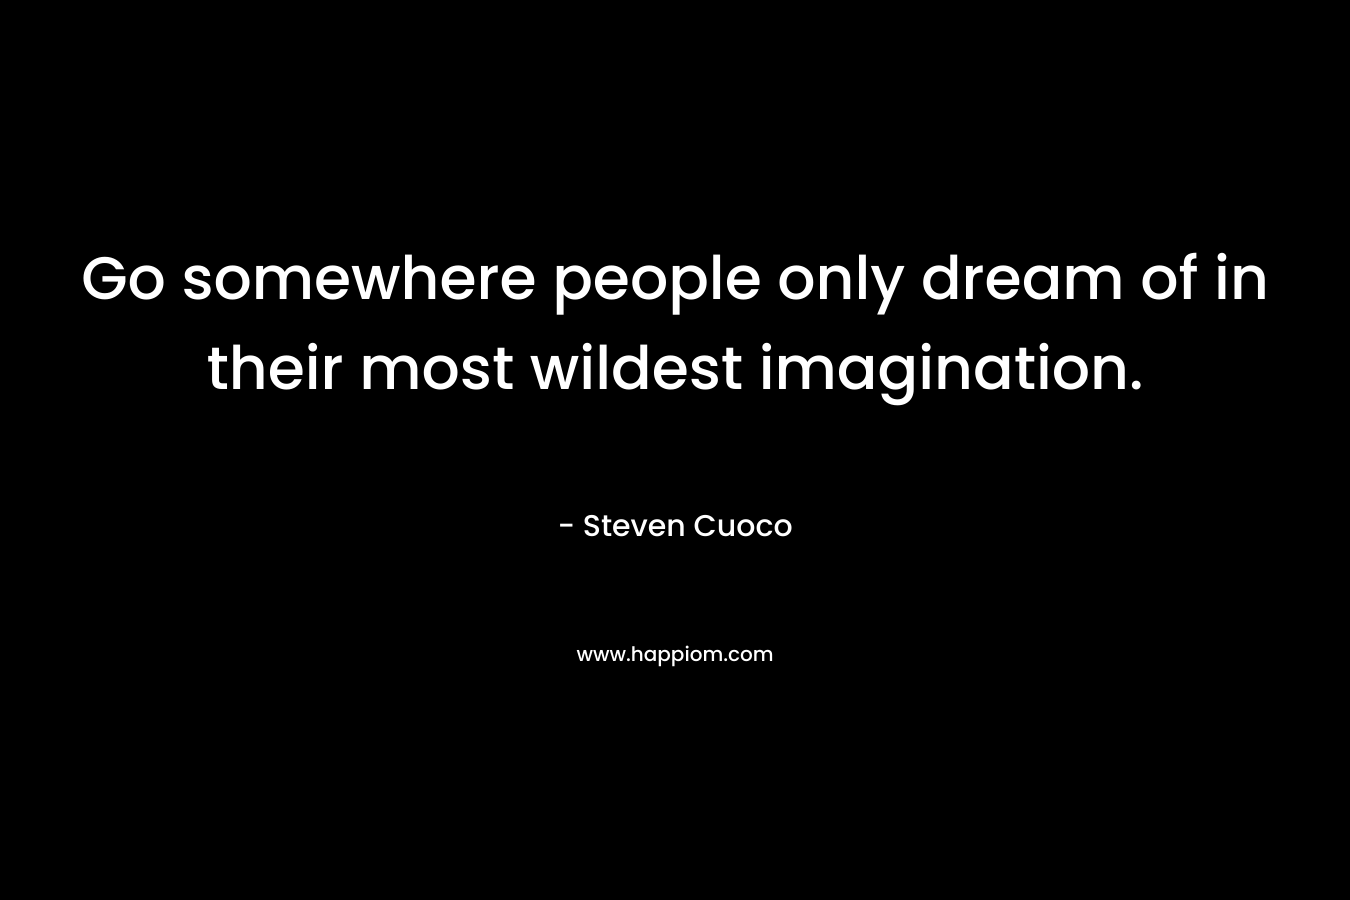 Go somewhere people only dream of in their most wildest imagination. – Steven Cuoco